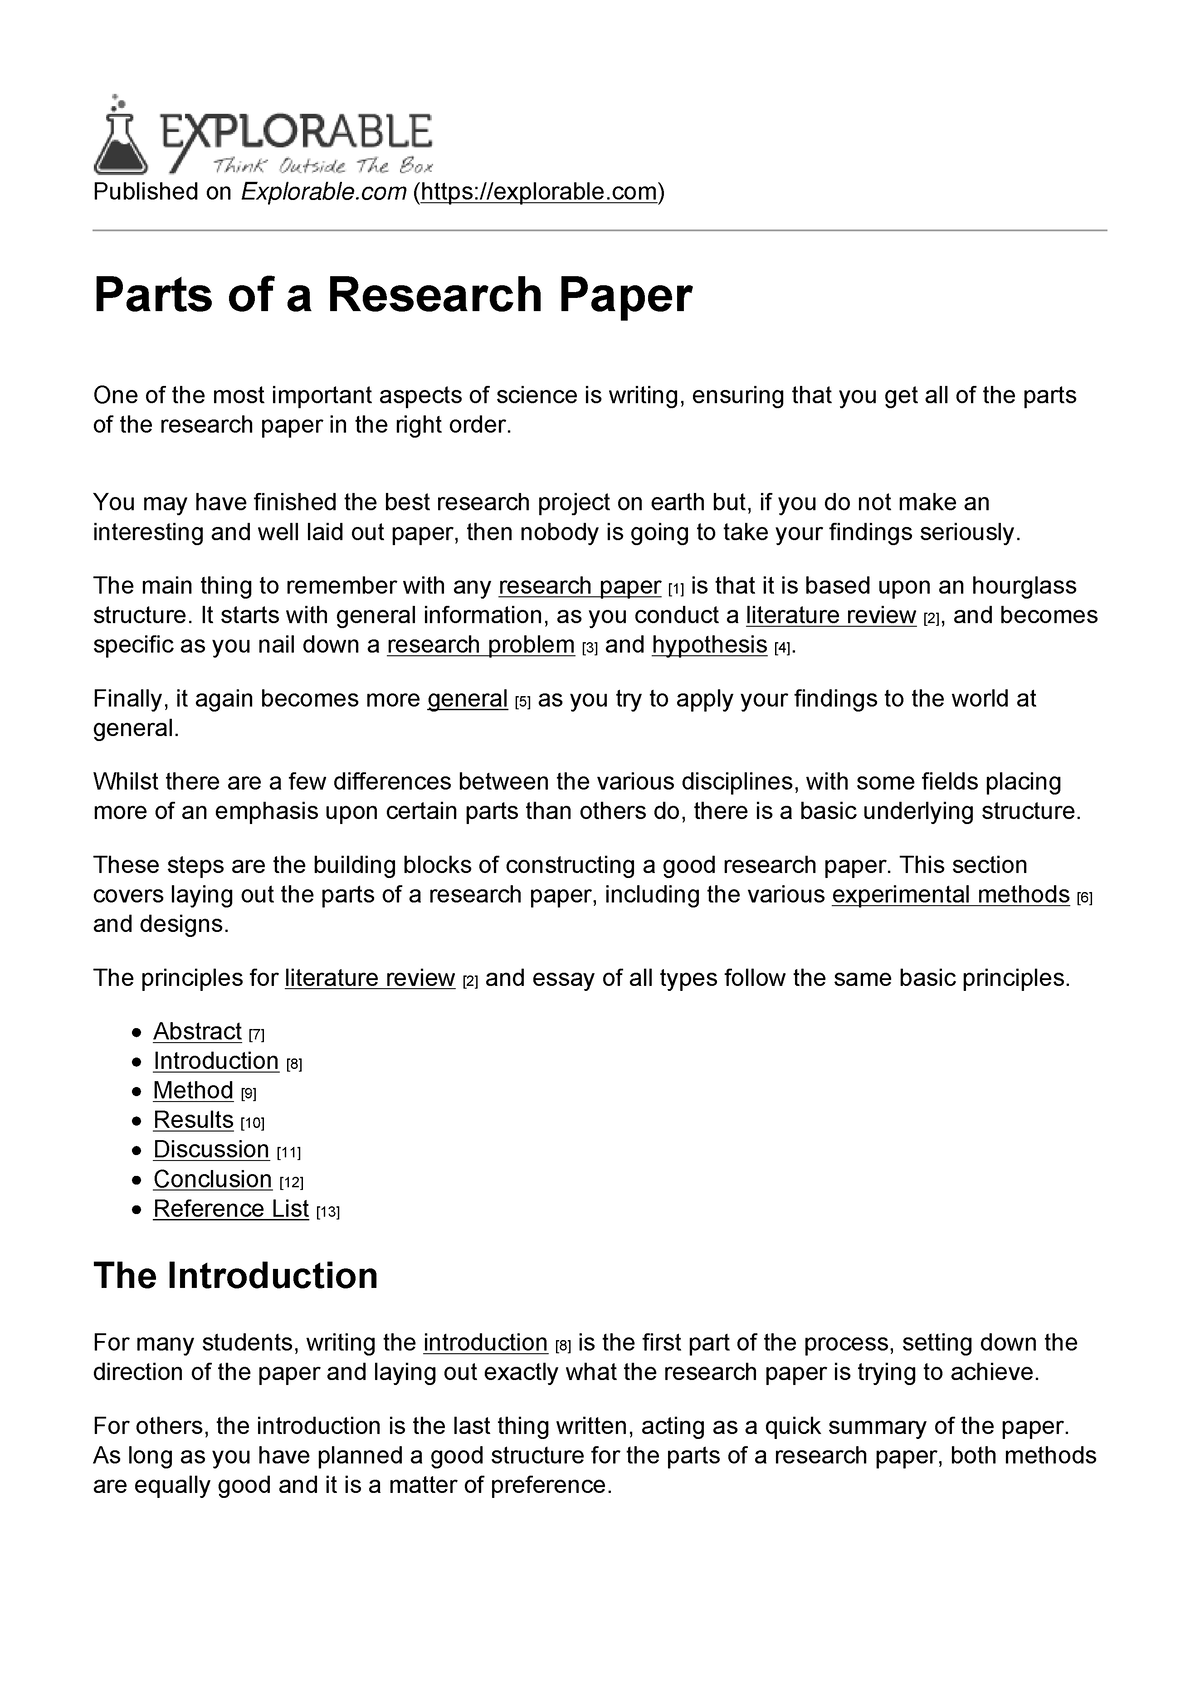 parts of research paper with description